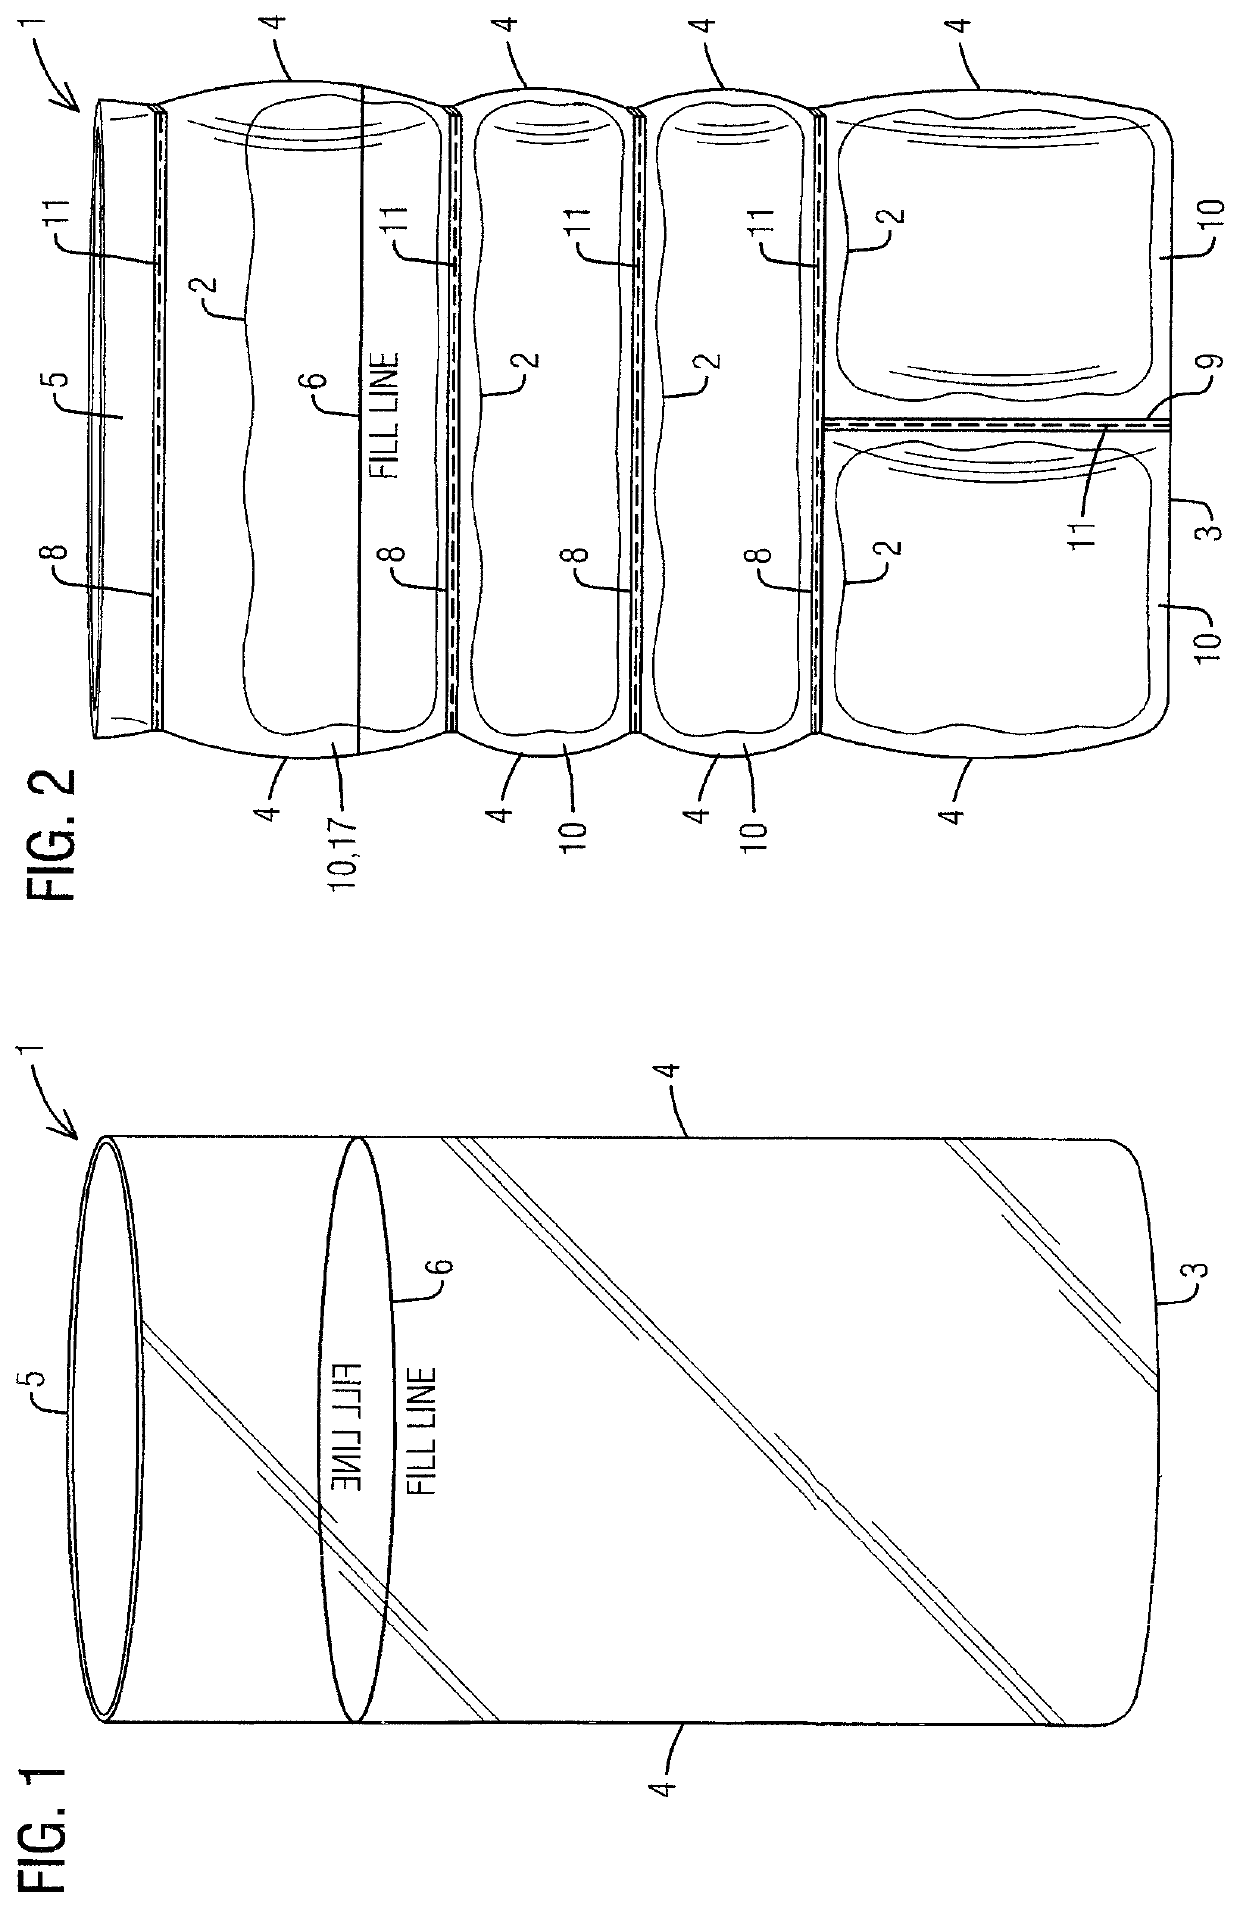 Paint storage system, device, and method for storing paint